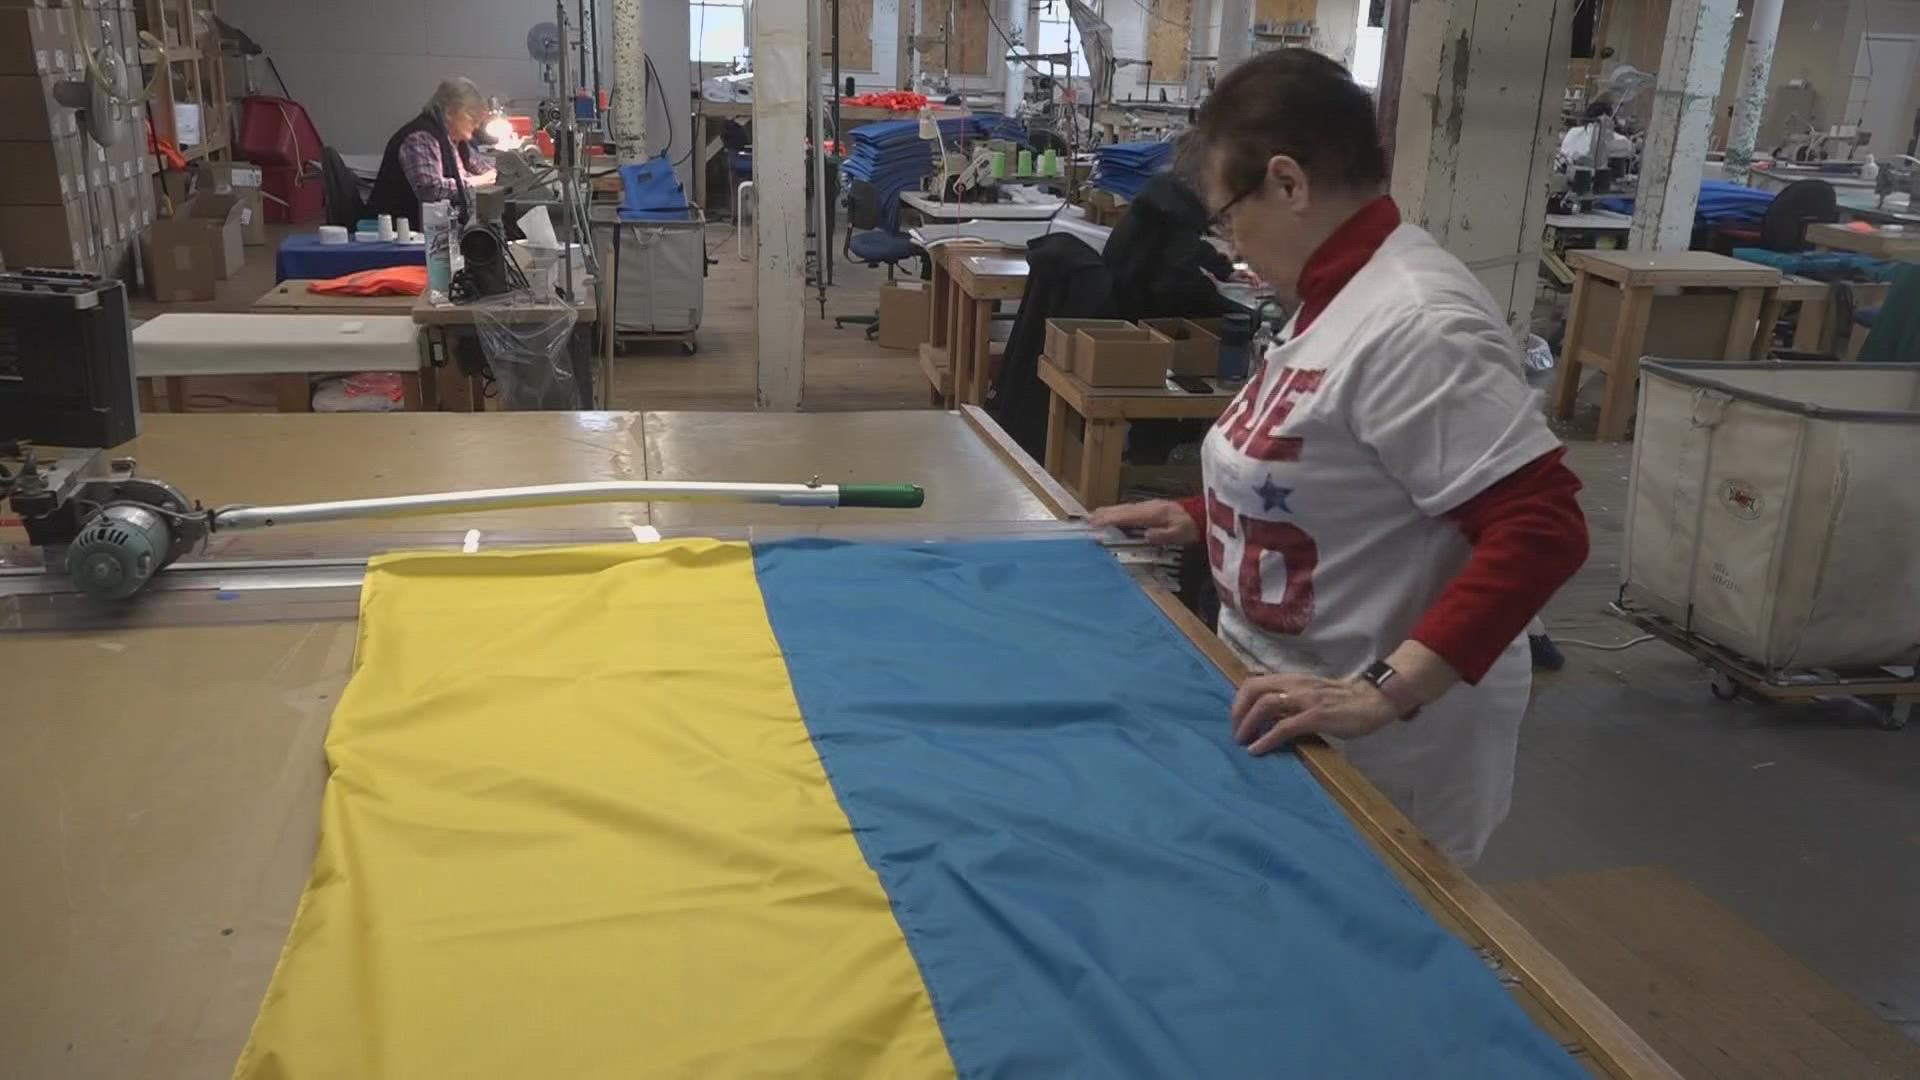 A store in Skowhegan, 1901 Maine Flag, is finding many Mainers want to show their support for Ukrainians with a Maine-made product.